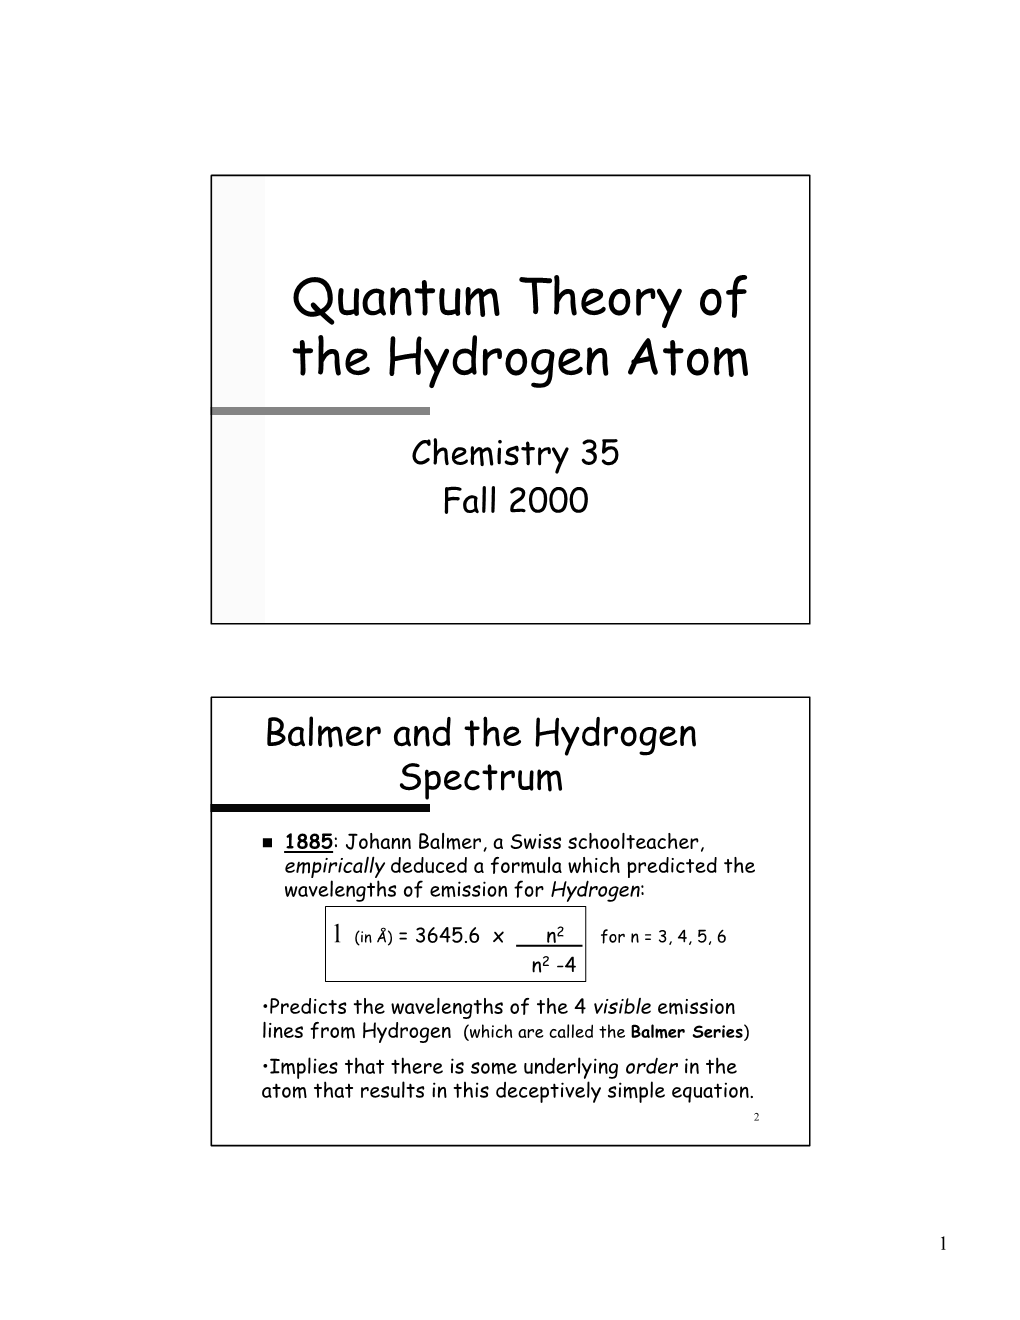 Quantum Theory of the Hydrogen Atom